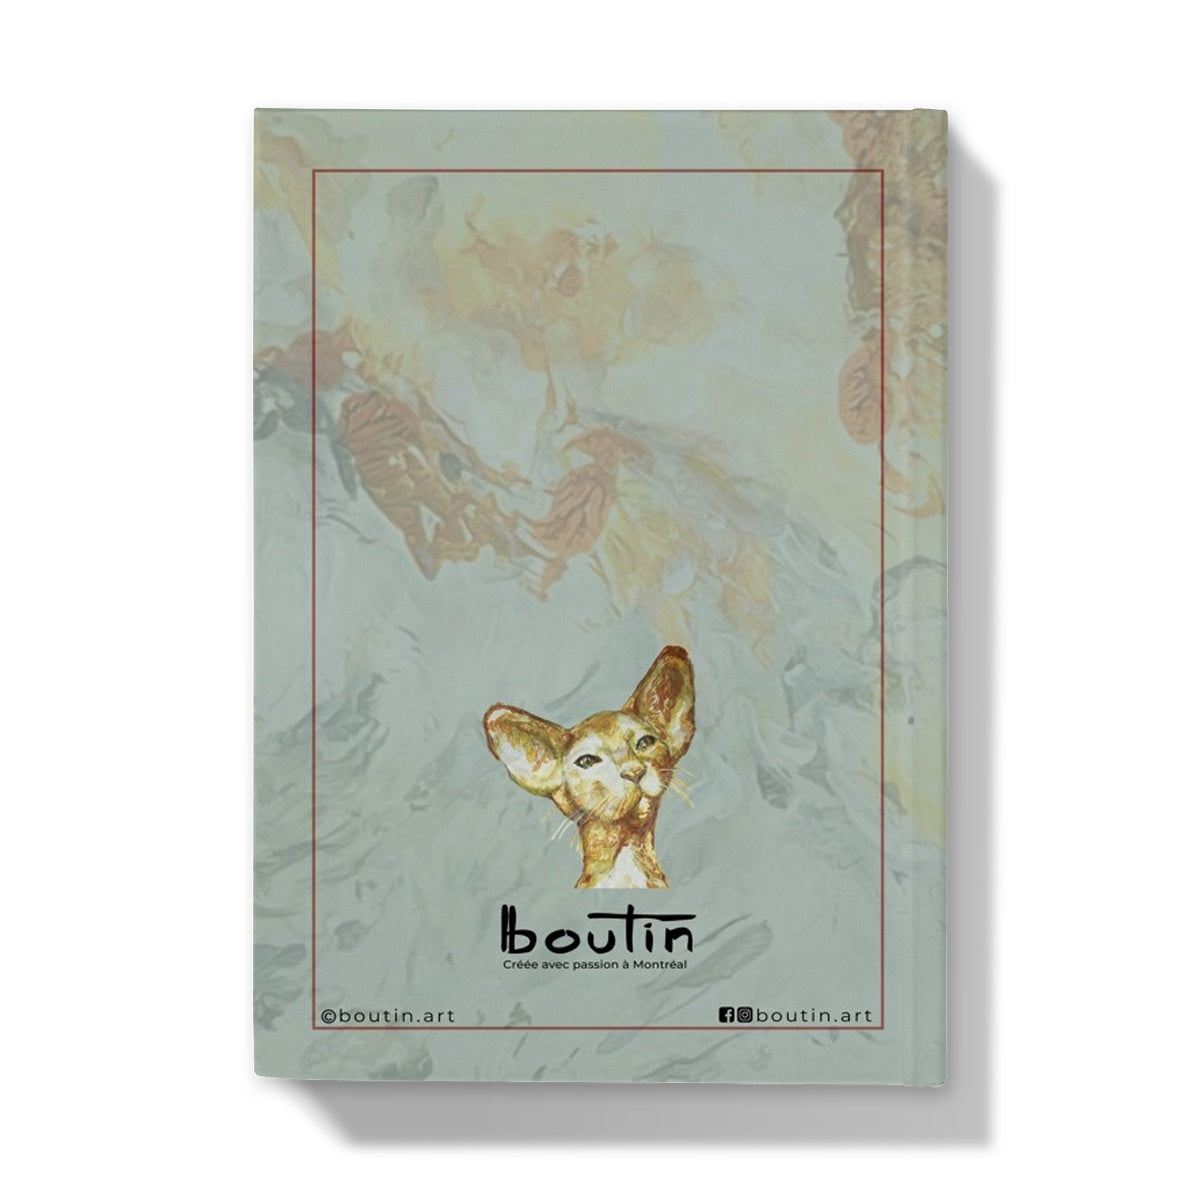 Green Cleopatra - Notebook by the artist Boutin